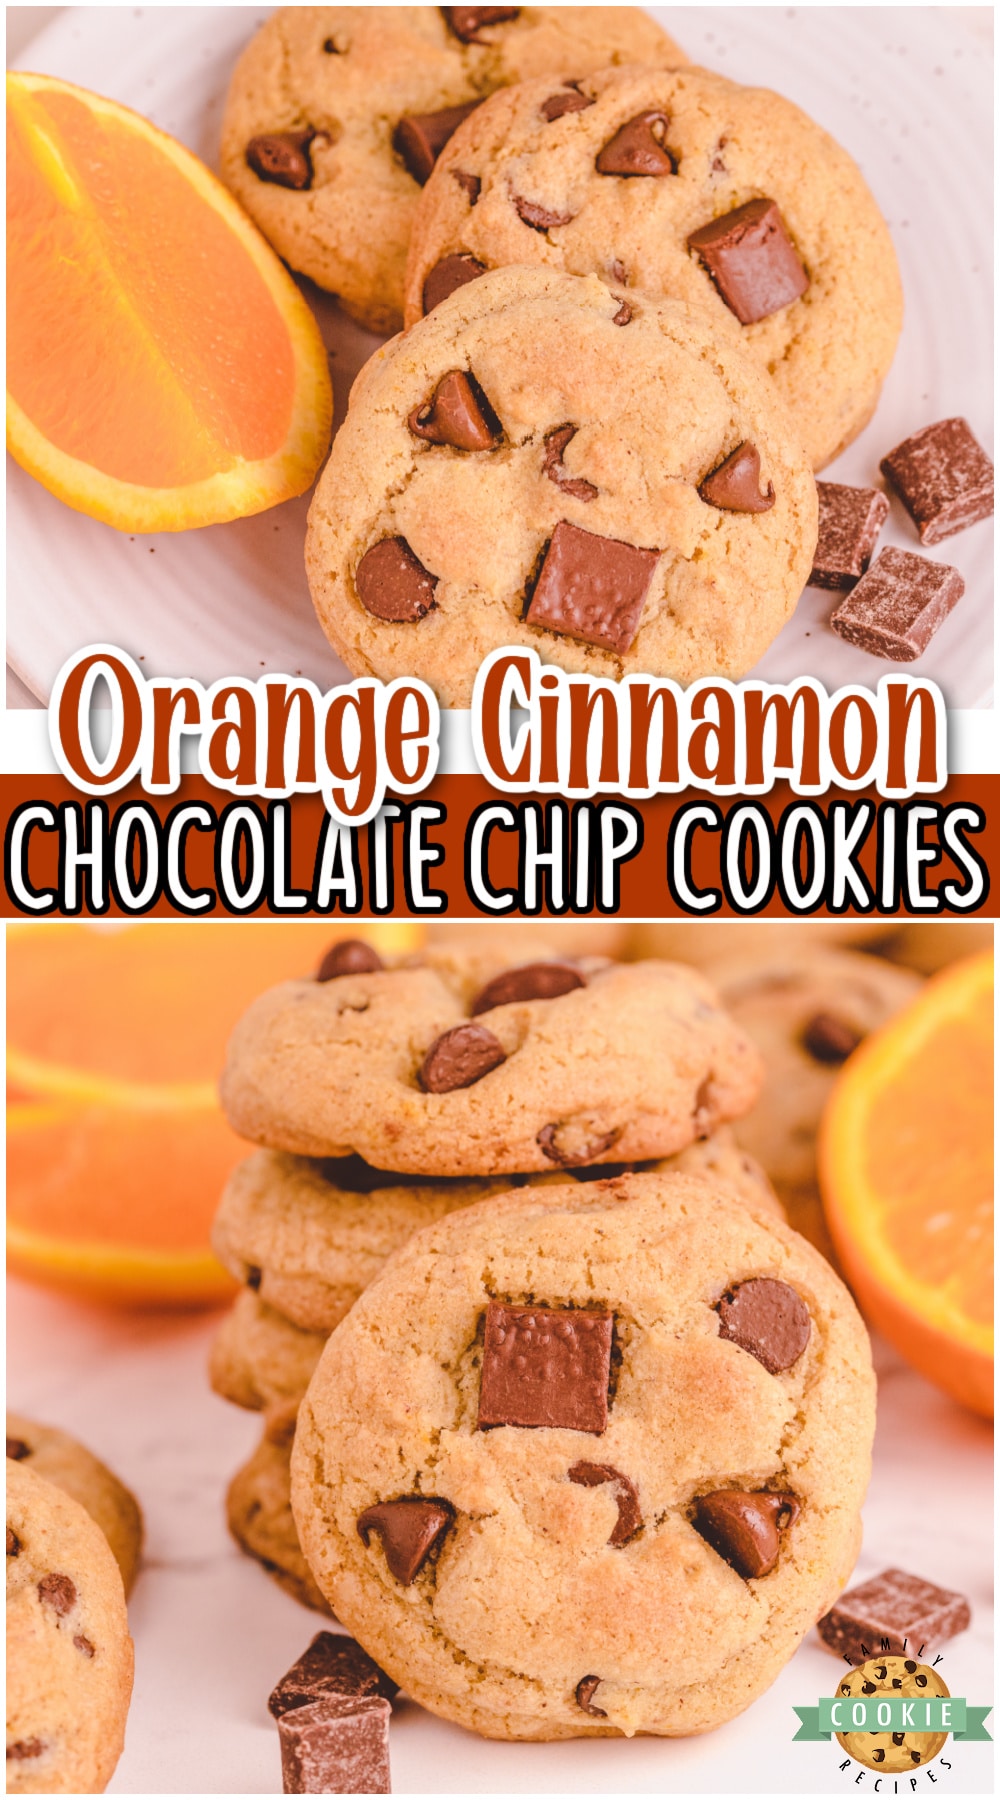 Orange Cinnamon chocolate chip cookies are a wonderful variation on a classic that's perfect for the holidays! Warm cinnamon flavor blends perfectly with bright citrus to compliment these buttery chocolate chip cookies.